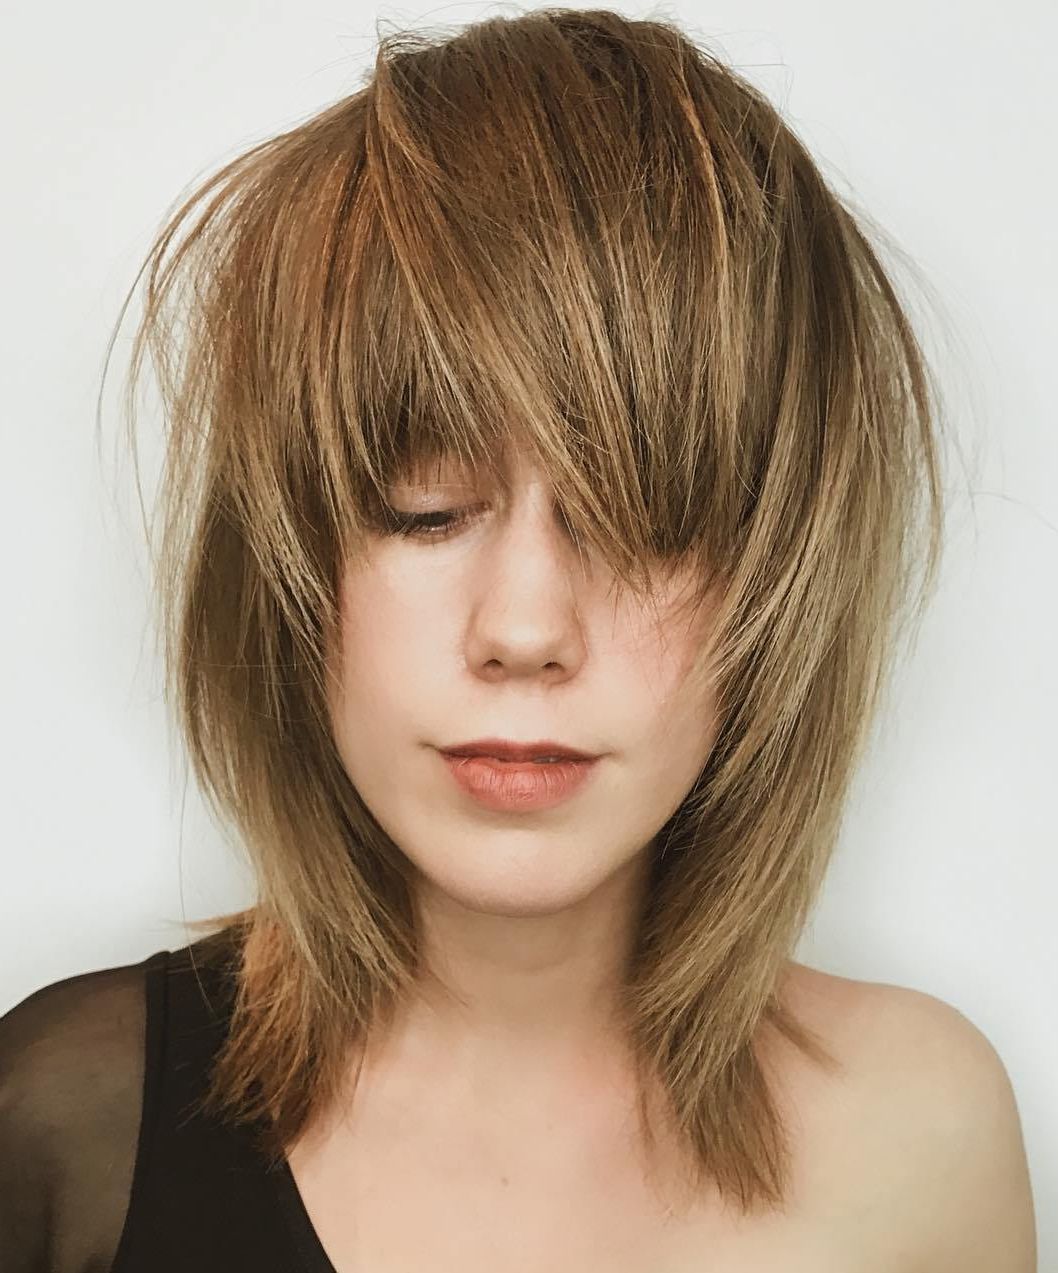 The Most Instagrammable Hairstyles With Bangs In 2019 Within Latest Medium Messy Shag Haircuts With Arched Bangs (View 3 of 20)